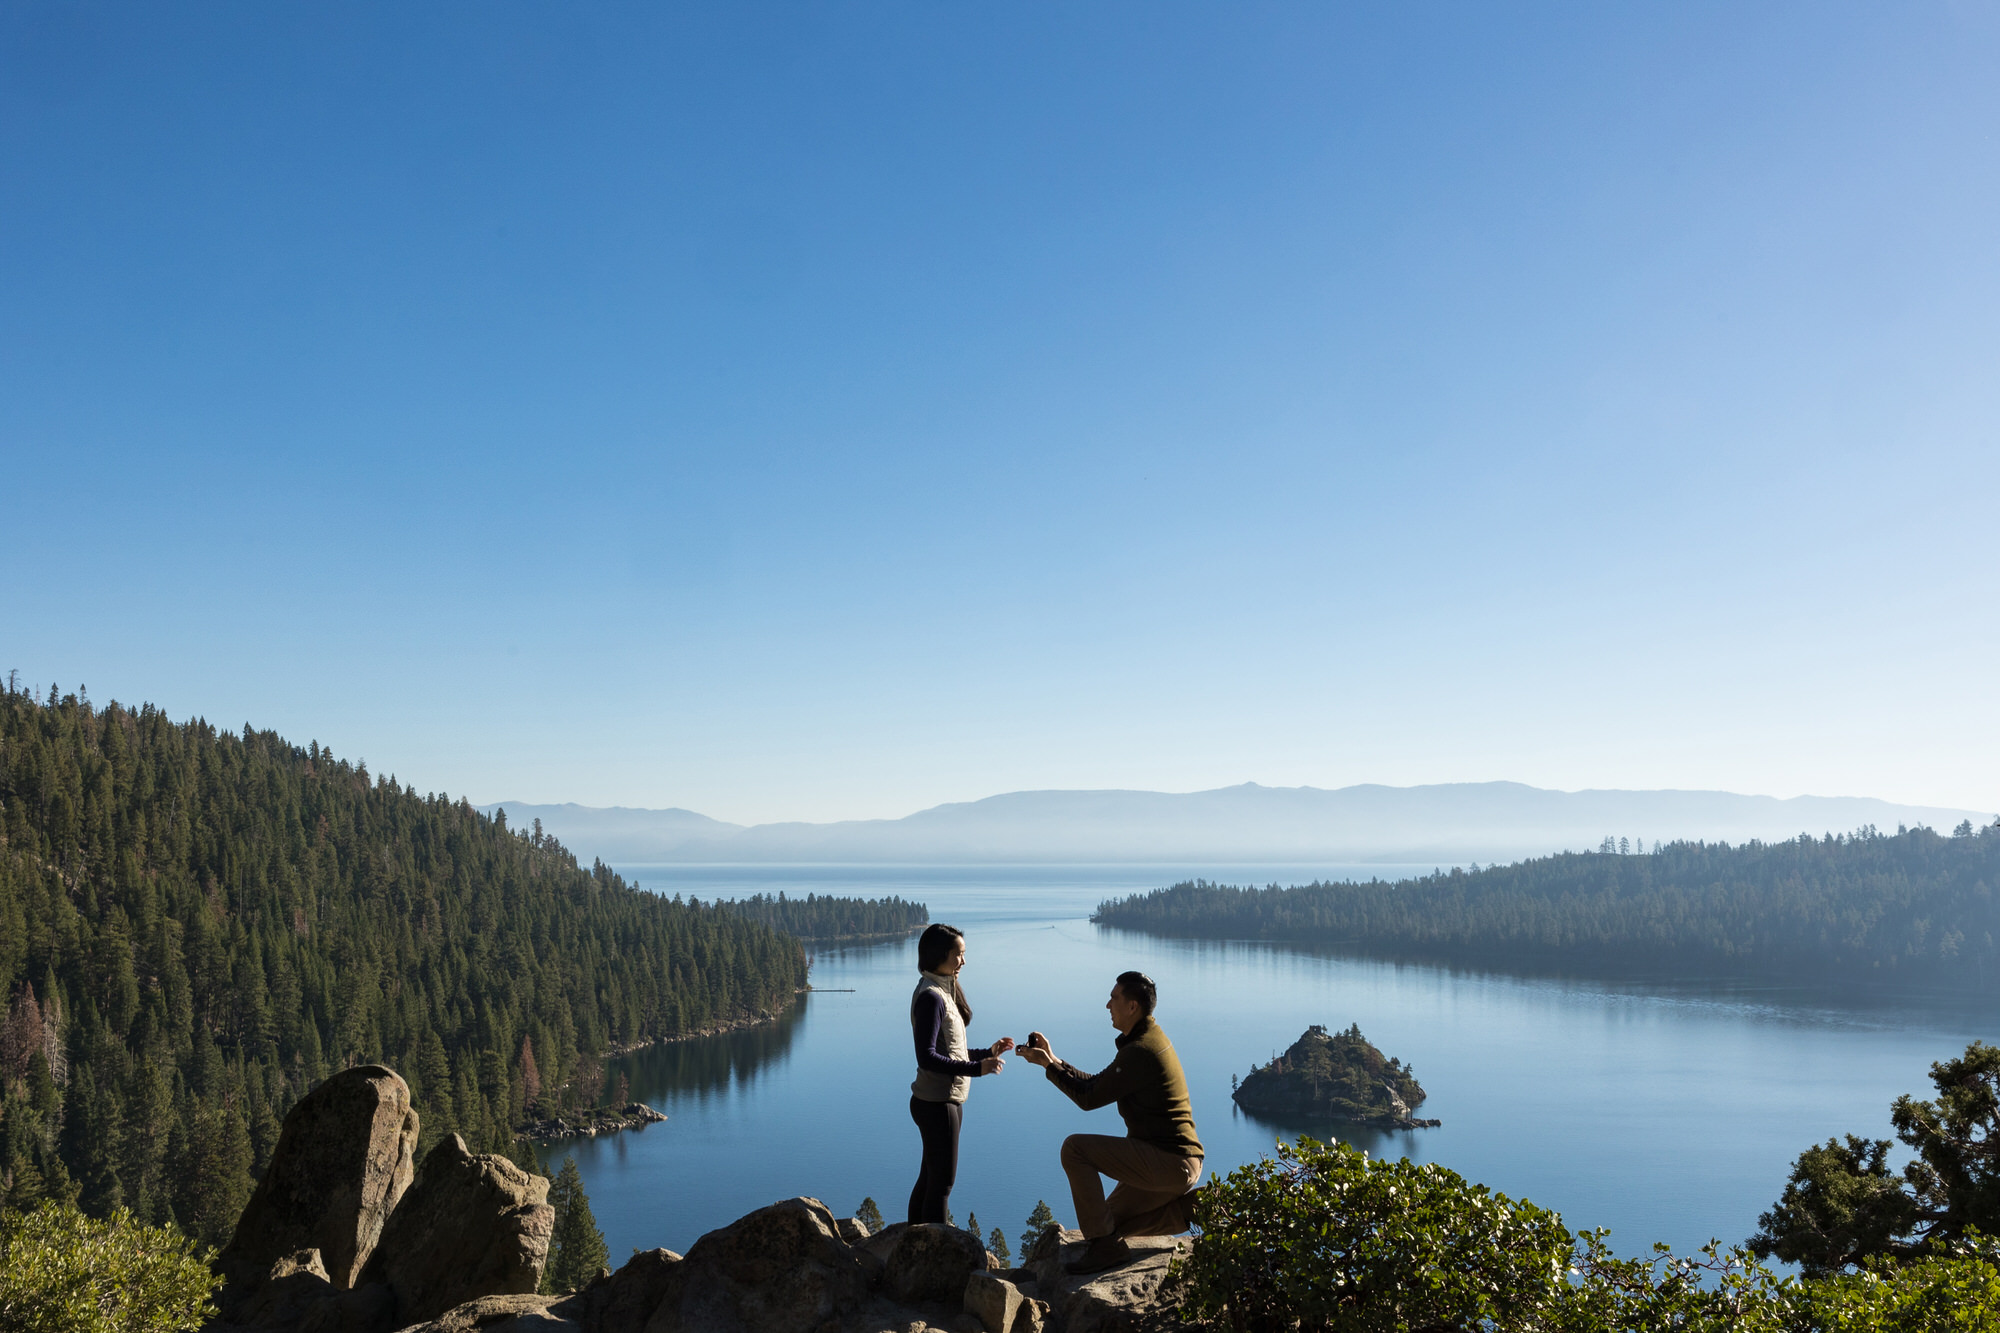 Getting down on one knee at an Emerald Bay wedding proposal.